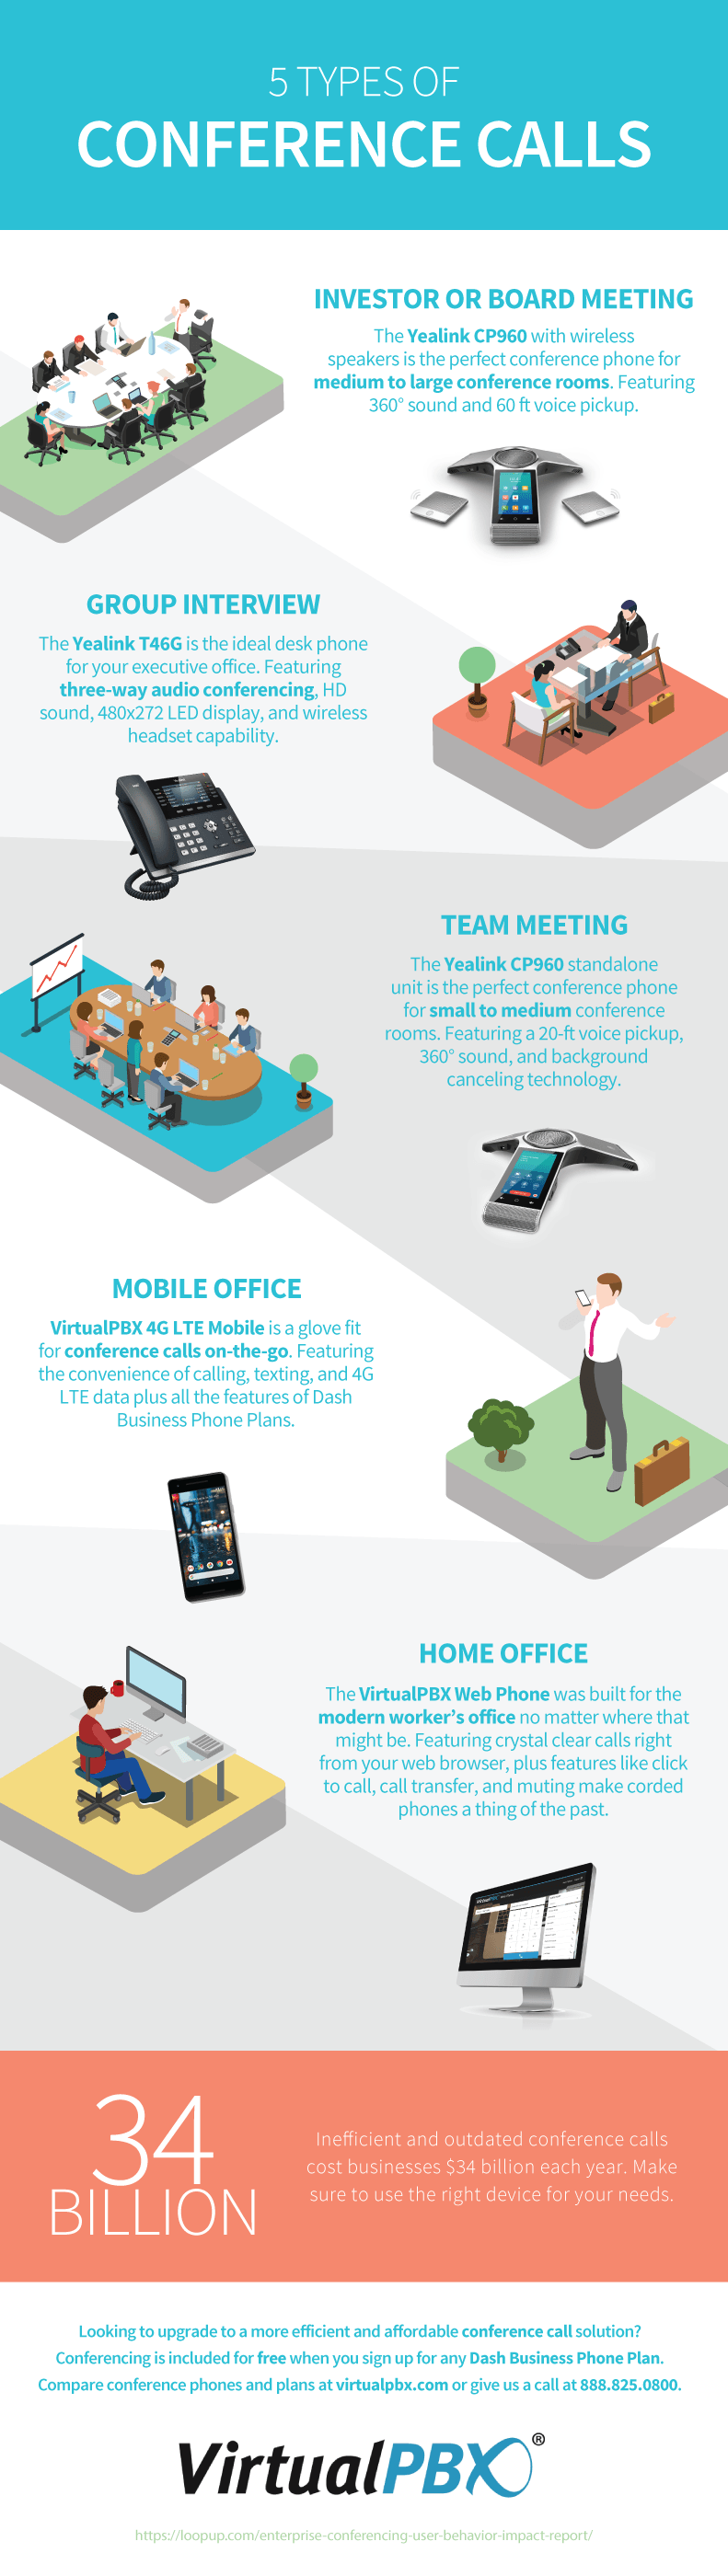 Conference call infographic